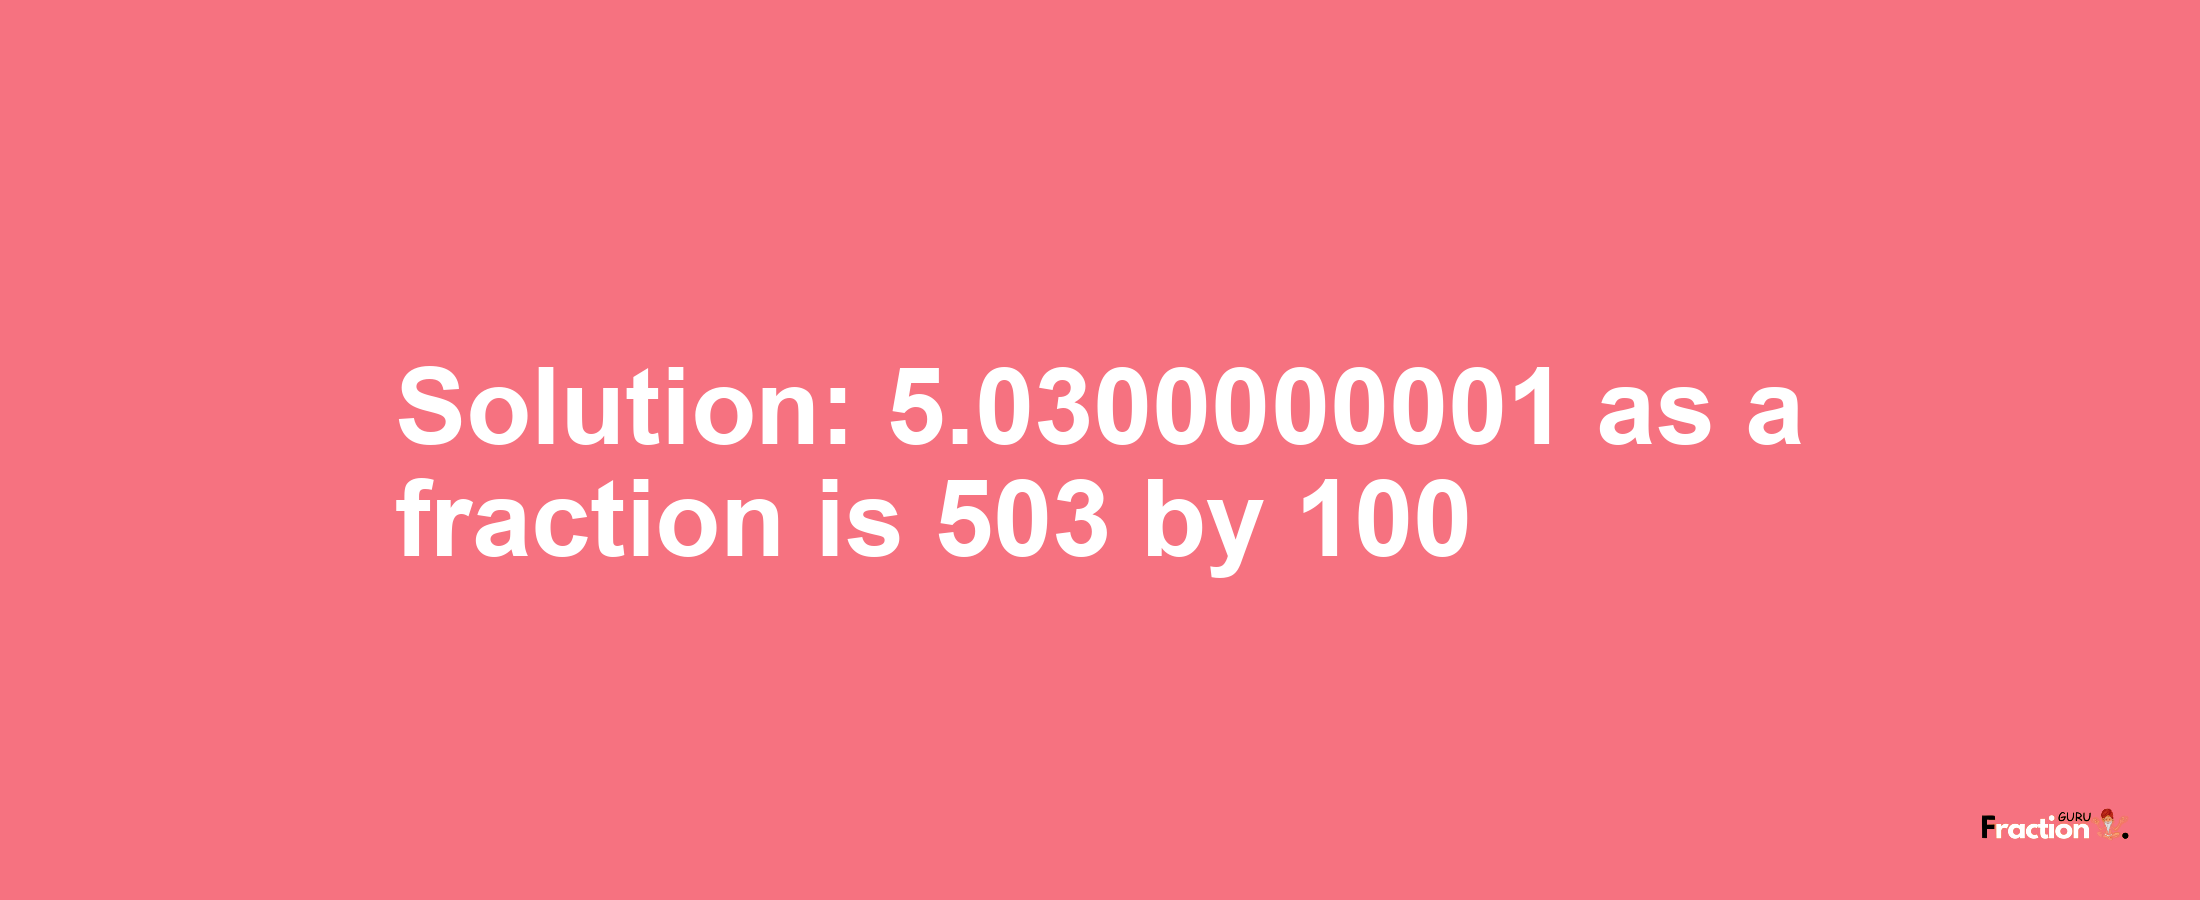 Solution:5.0300000001 as a fraction is 503/100